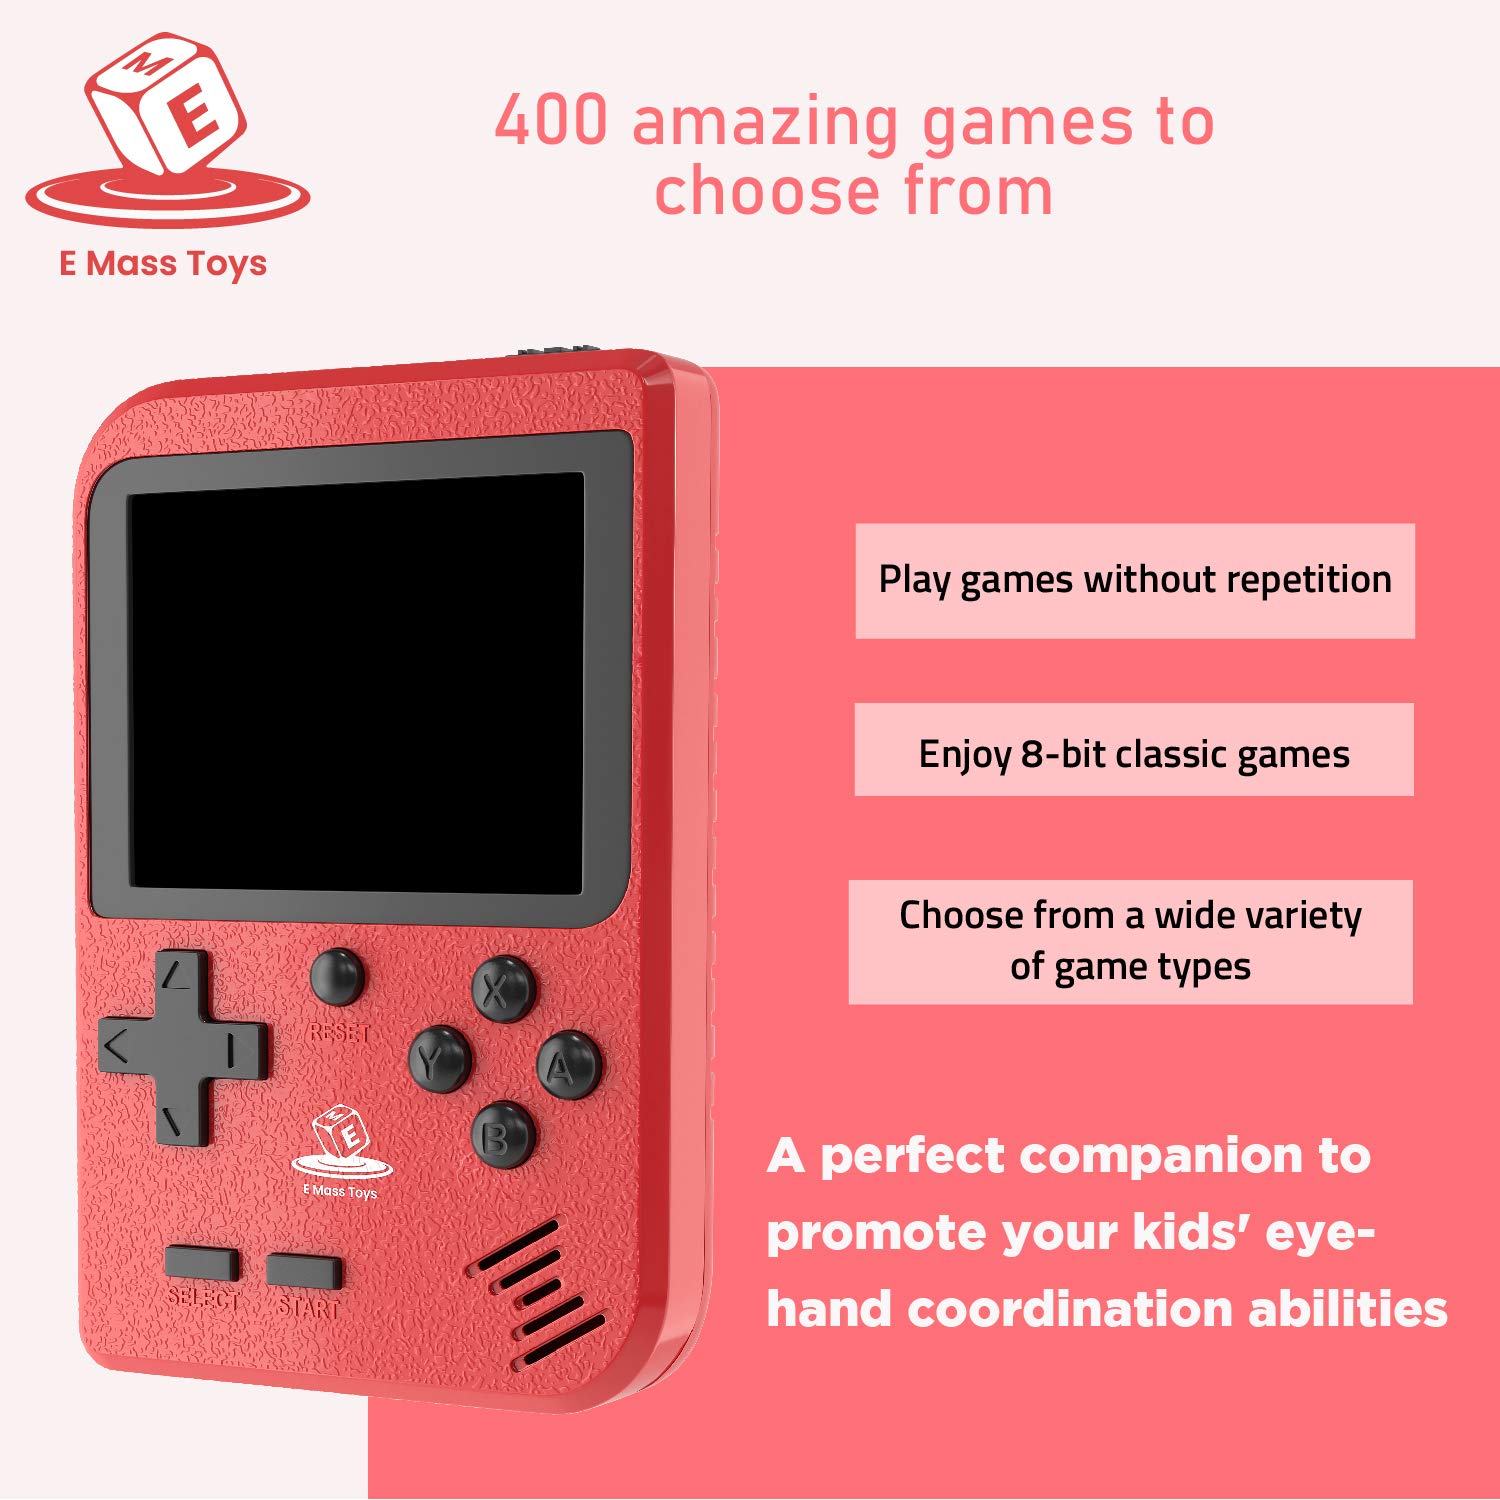 Emaas Handheld Game Console, Retro Mini Game with 400 Classic FC Games- 2.8-Inch Color Screen Support for Connecting TV & Two Players 800mAh Rechargeable Battery Suitable for Kids & Adults